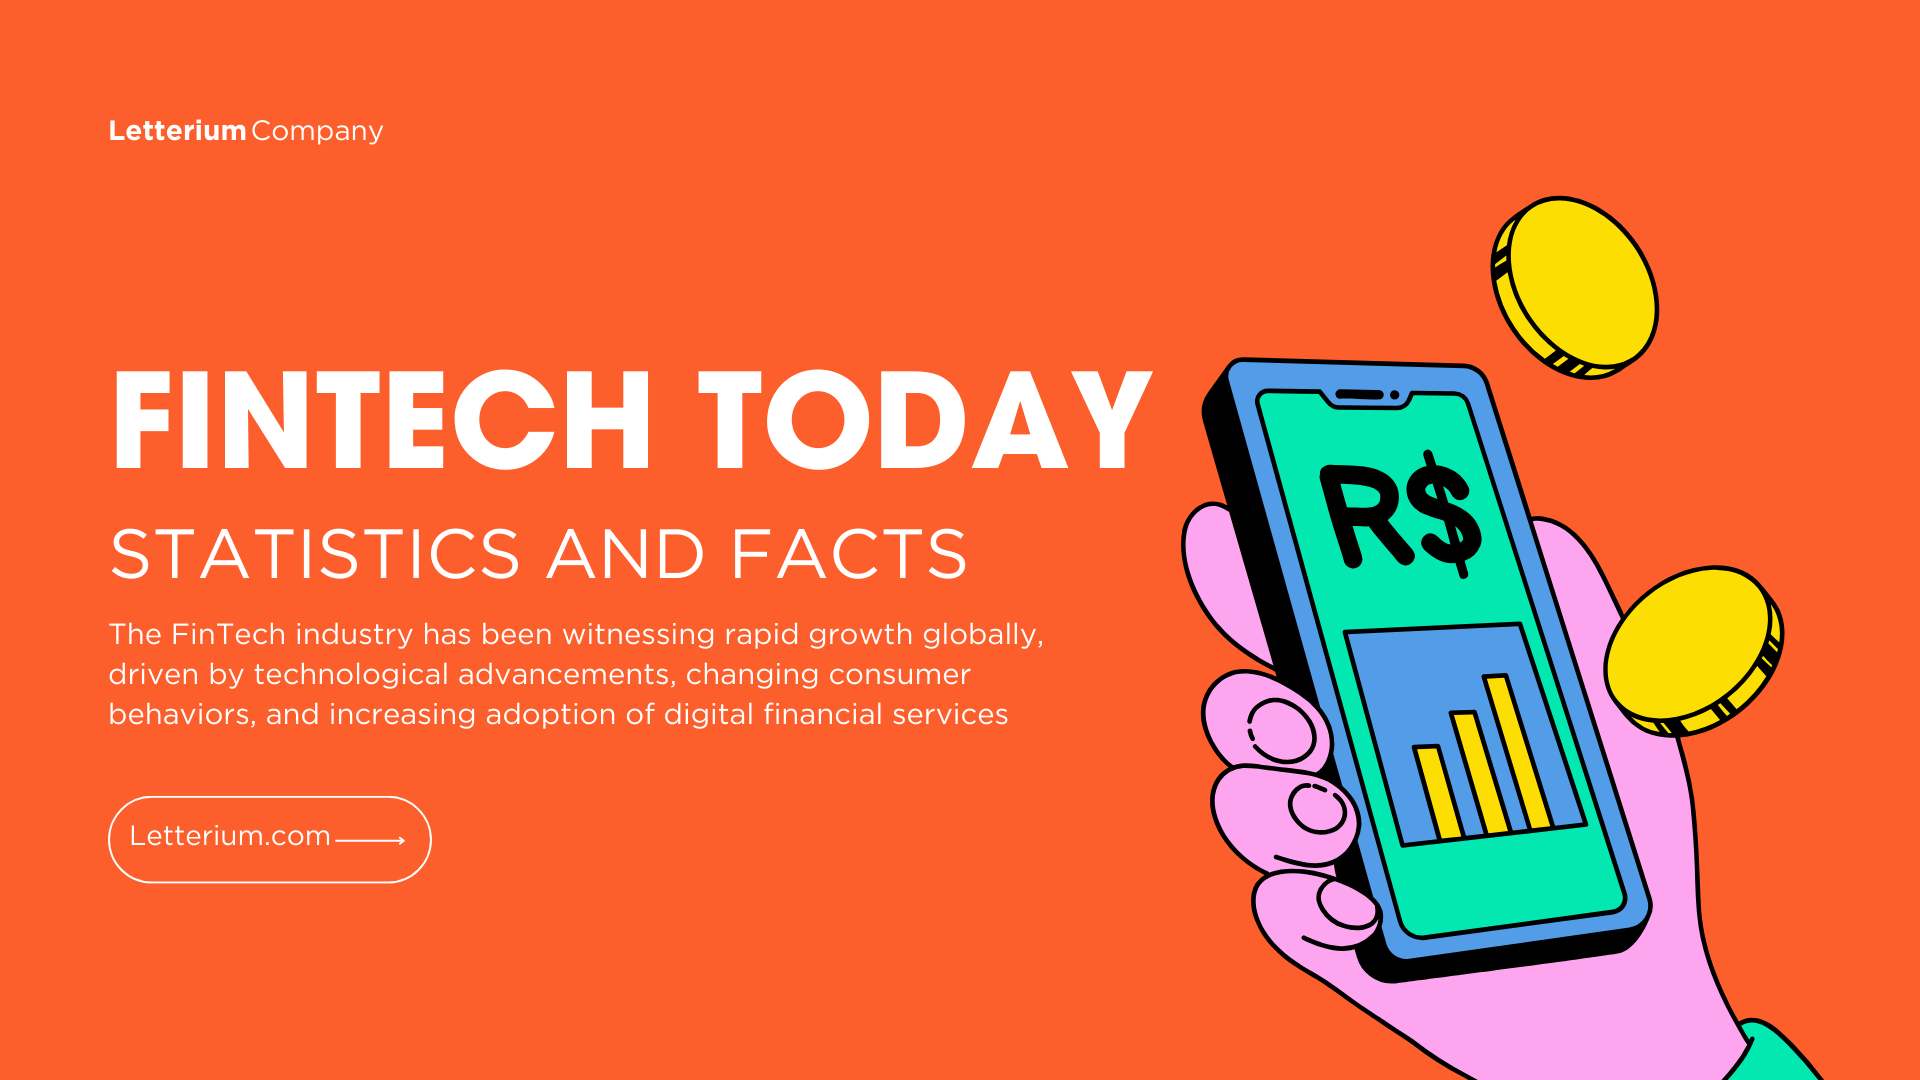 FinTech Today - Statistics and Facts